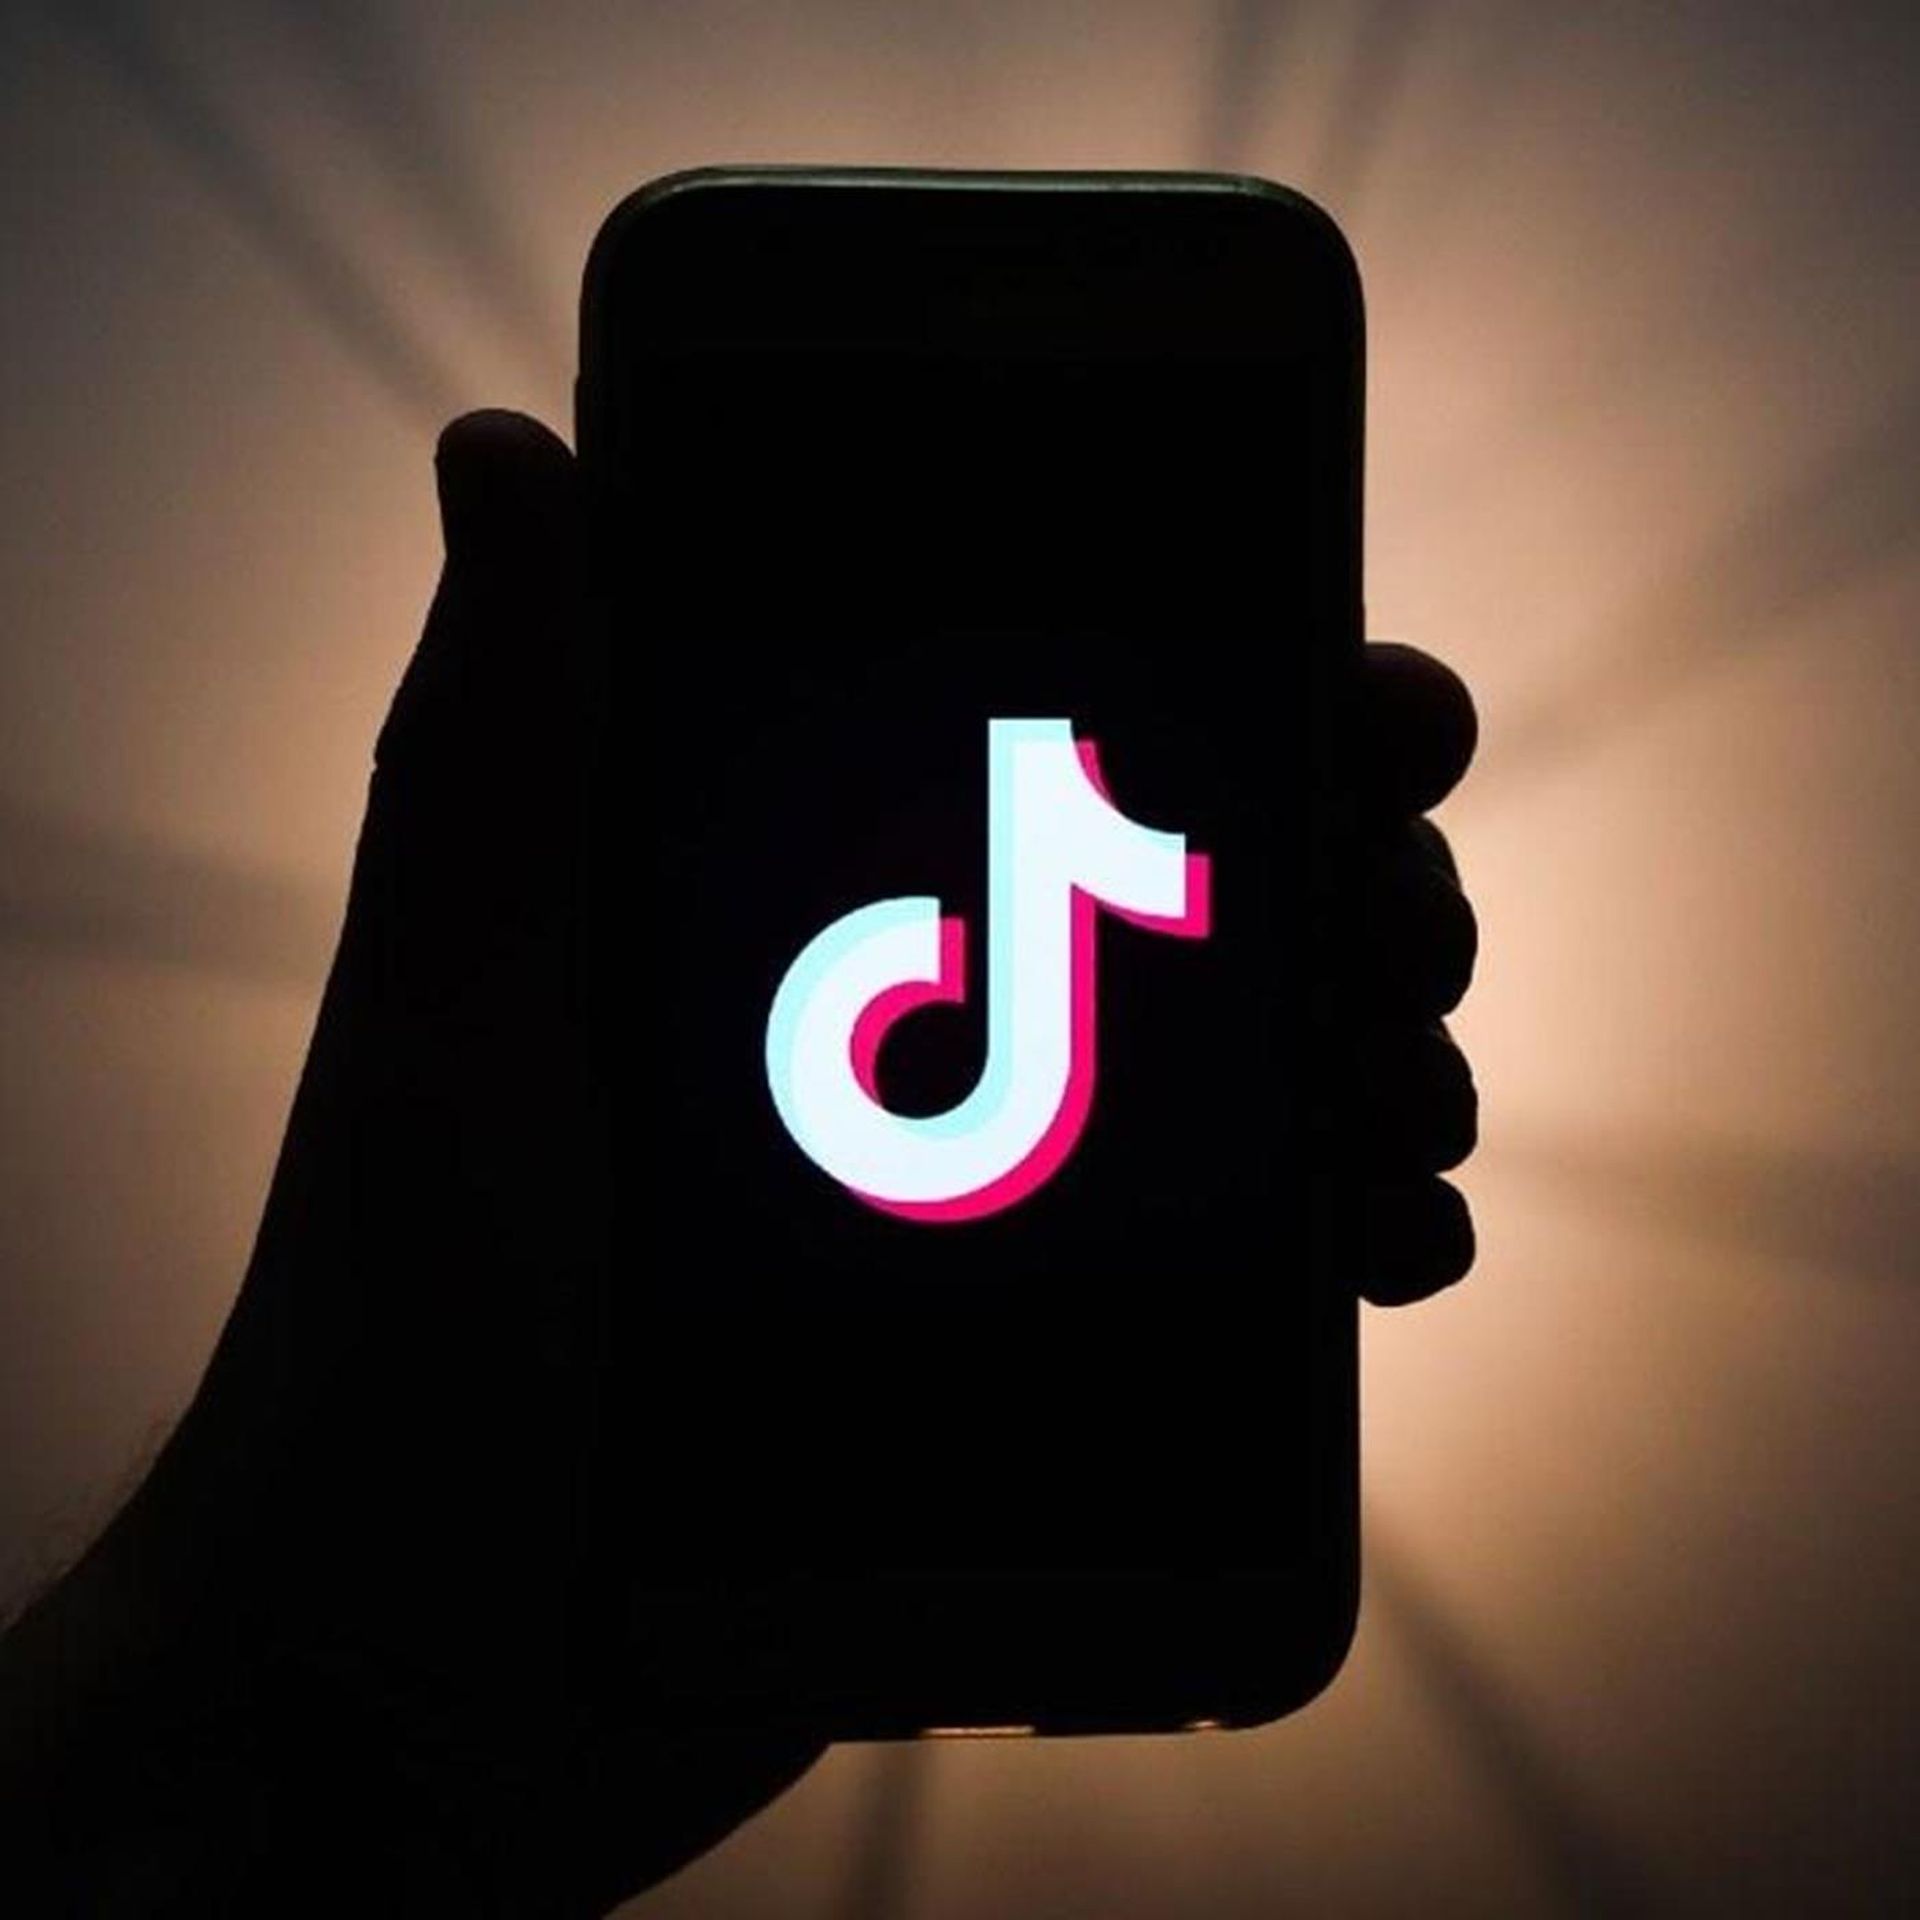 Can you remove a filter on TikTok?